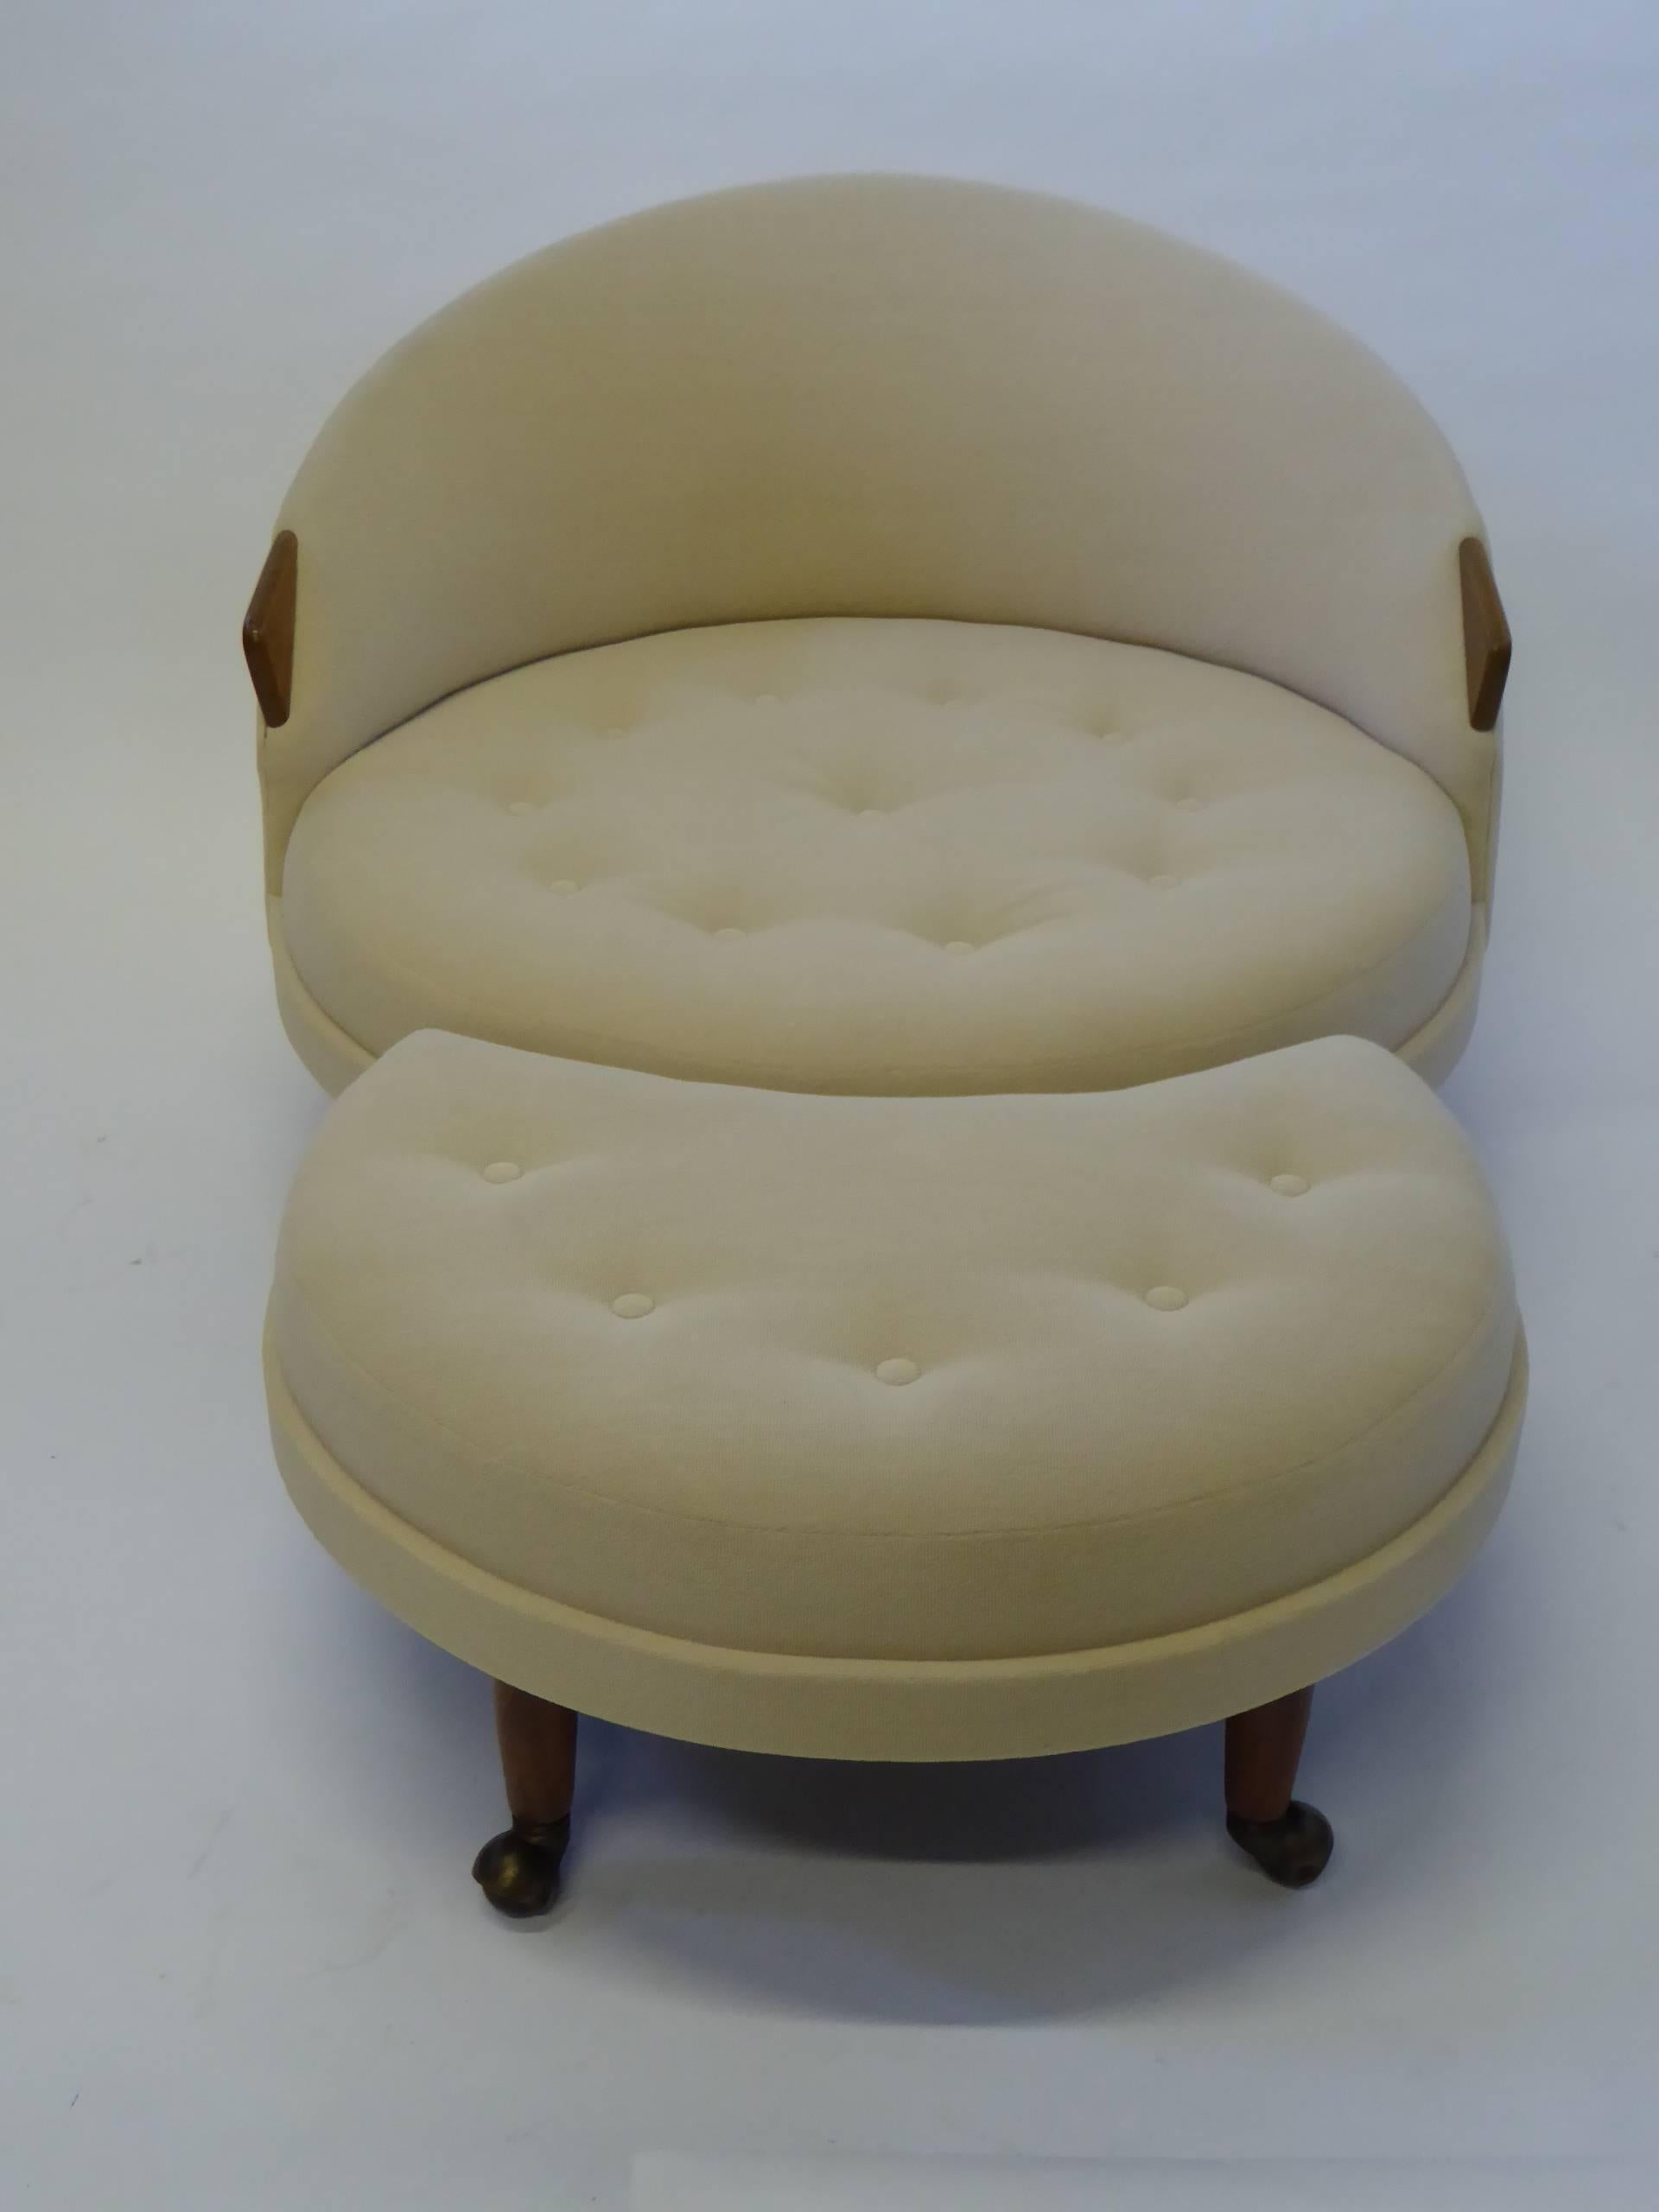 Wonderful tony design by Adrian Pearsall for his firm Craft Associates, this button tufted lounge chair with fitted ottoman has a comfortable low scale, sporting fat tapered walnut legs on casters and arms ending in walnut fins, echoing car tail